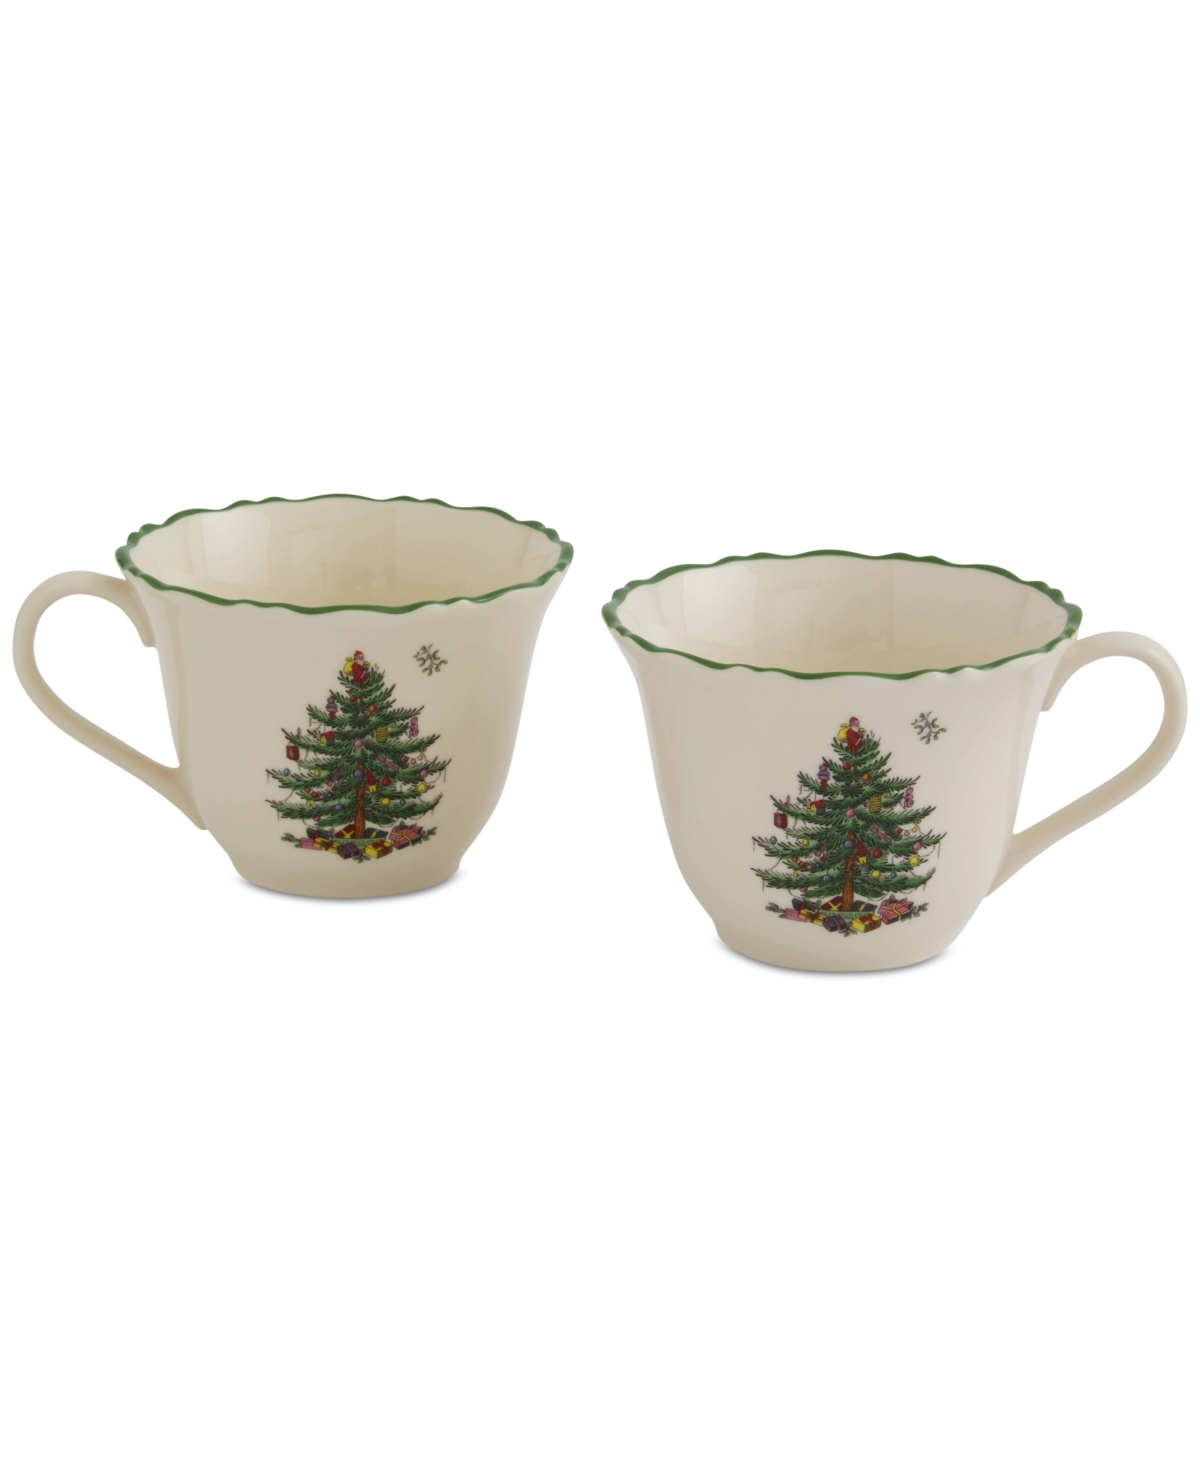 Spode Tree Punch Cups, Set Of 2 In Green